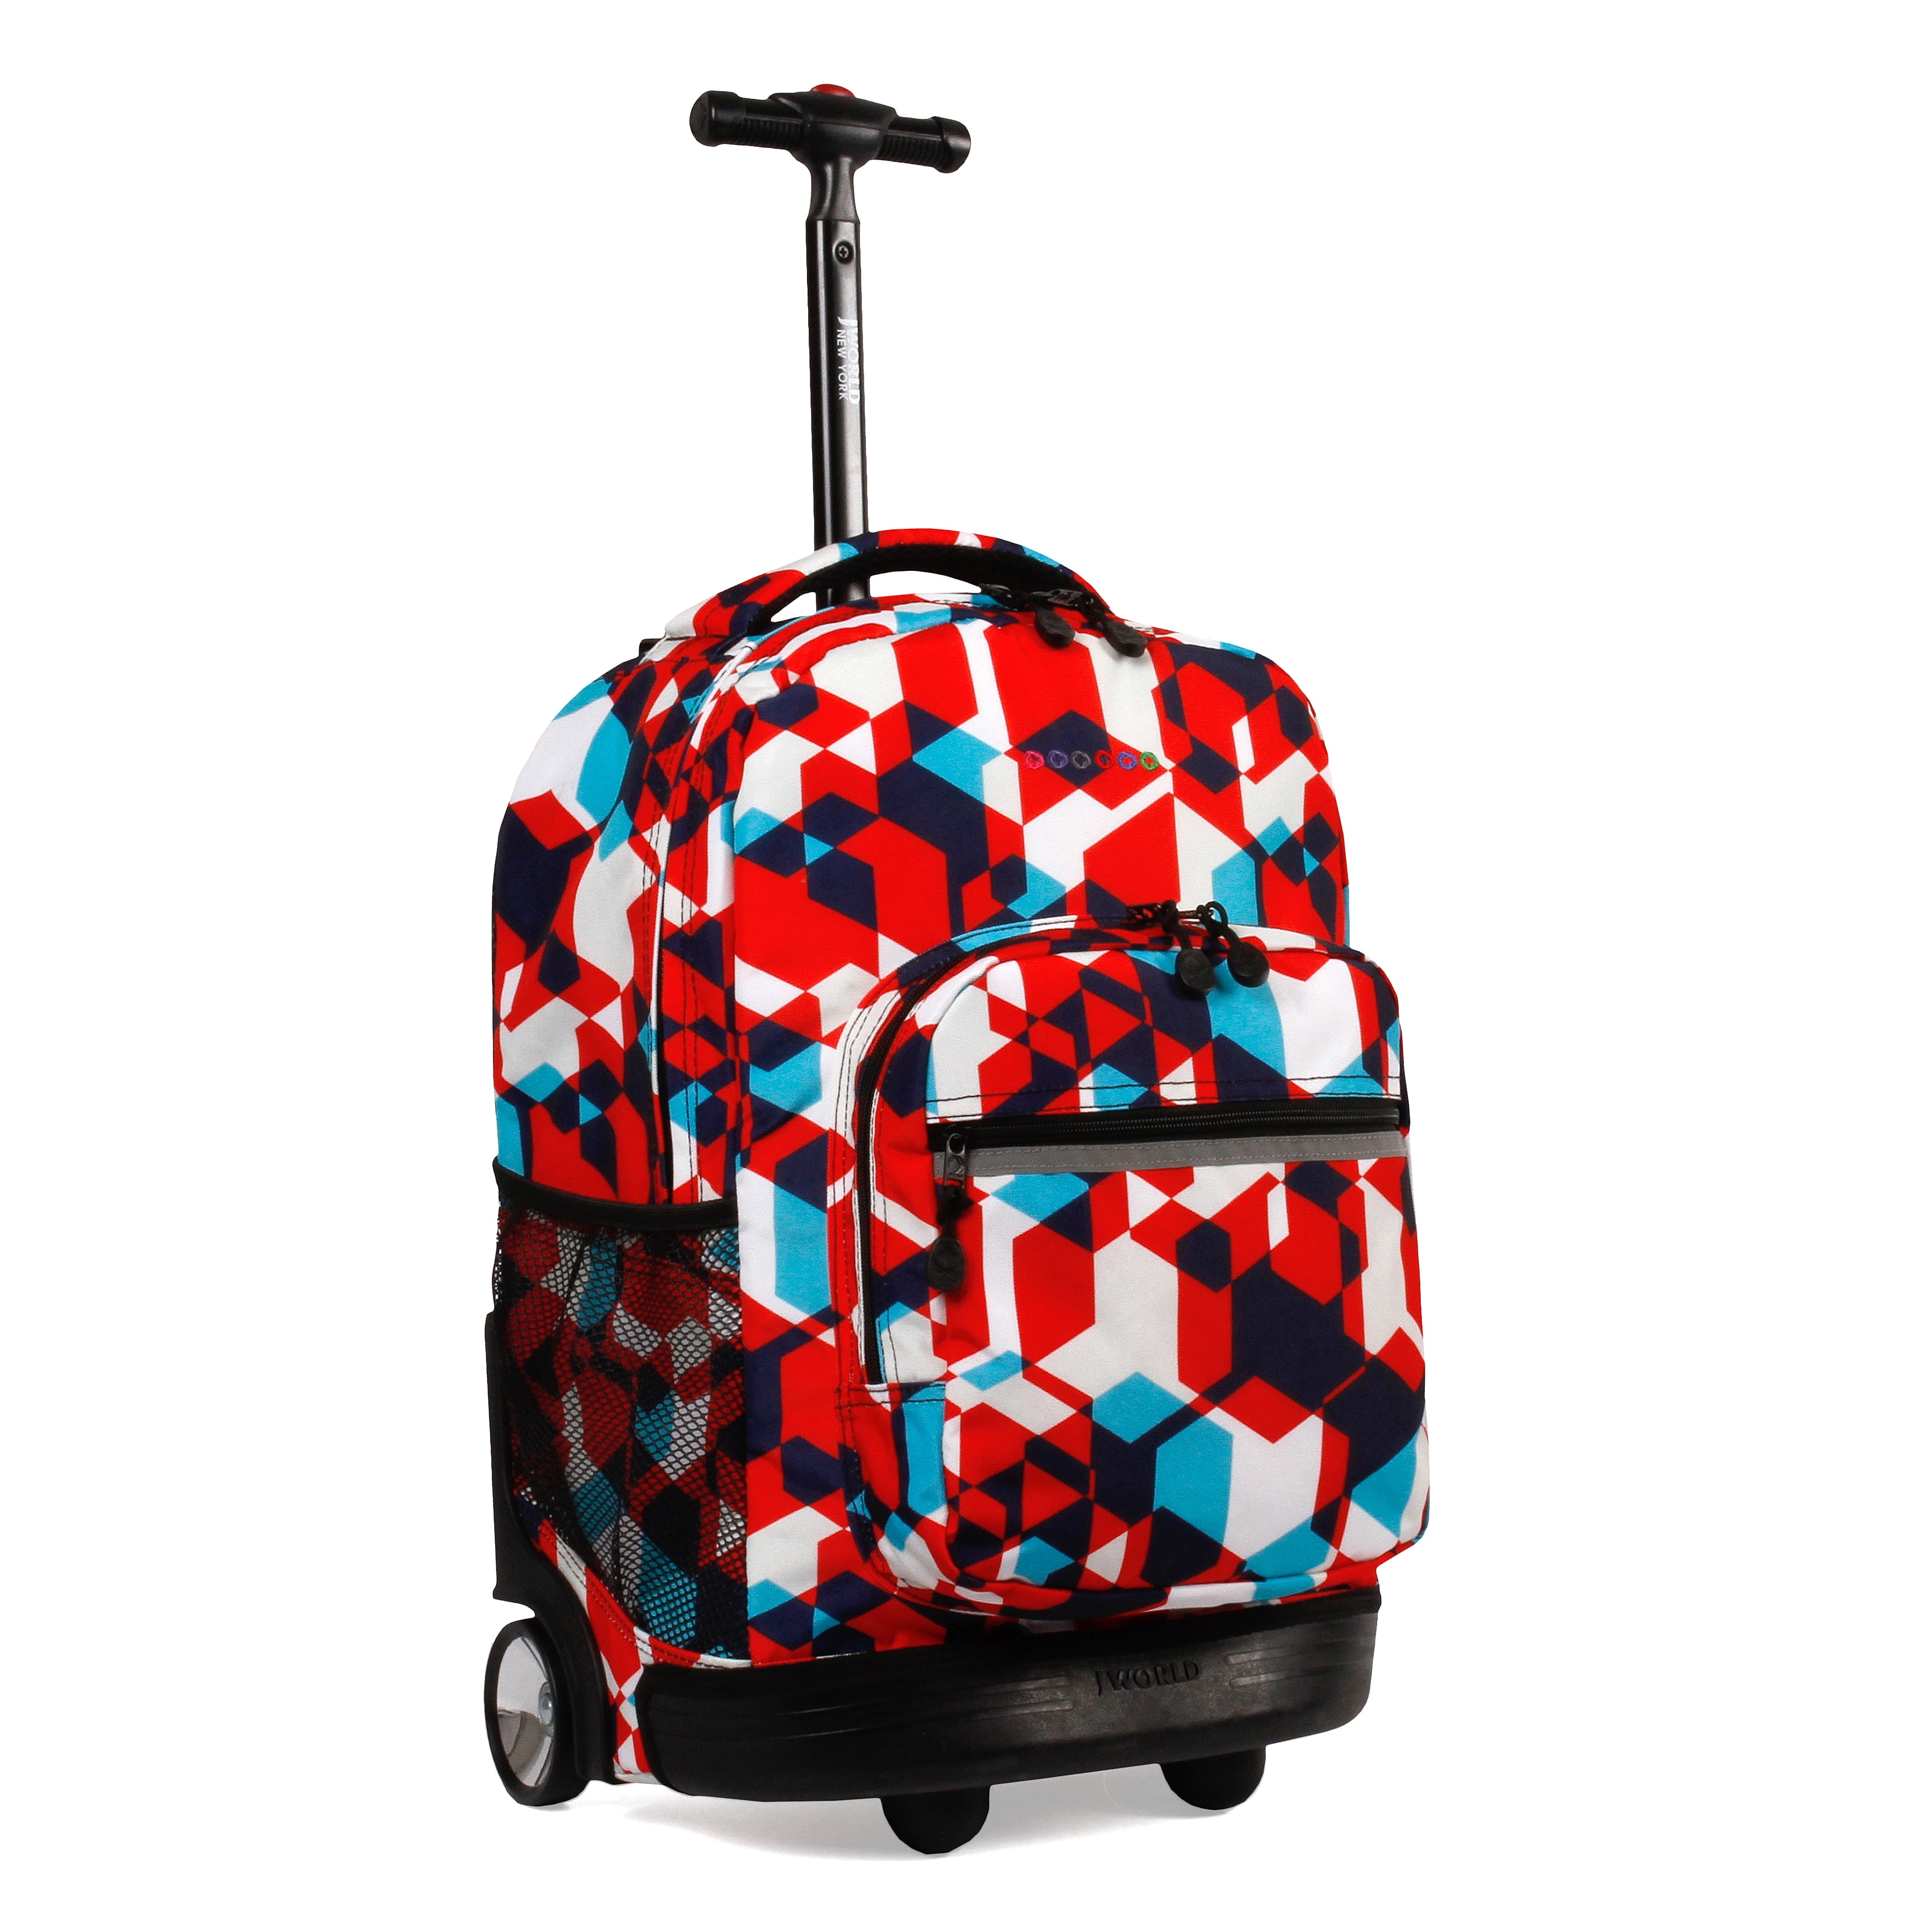 J World New York Sunrise Rolling Backpack Red Cubes Roller Bag with Wheels 18